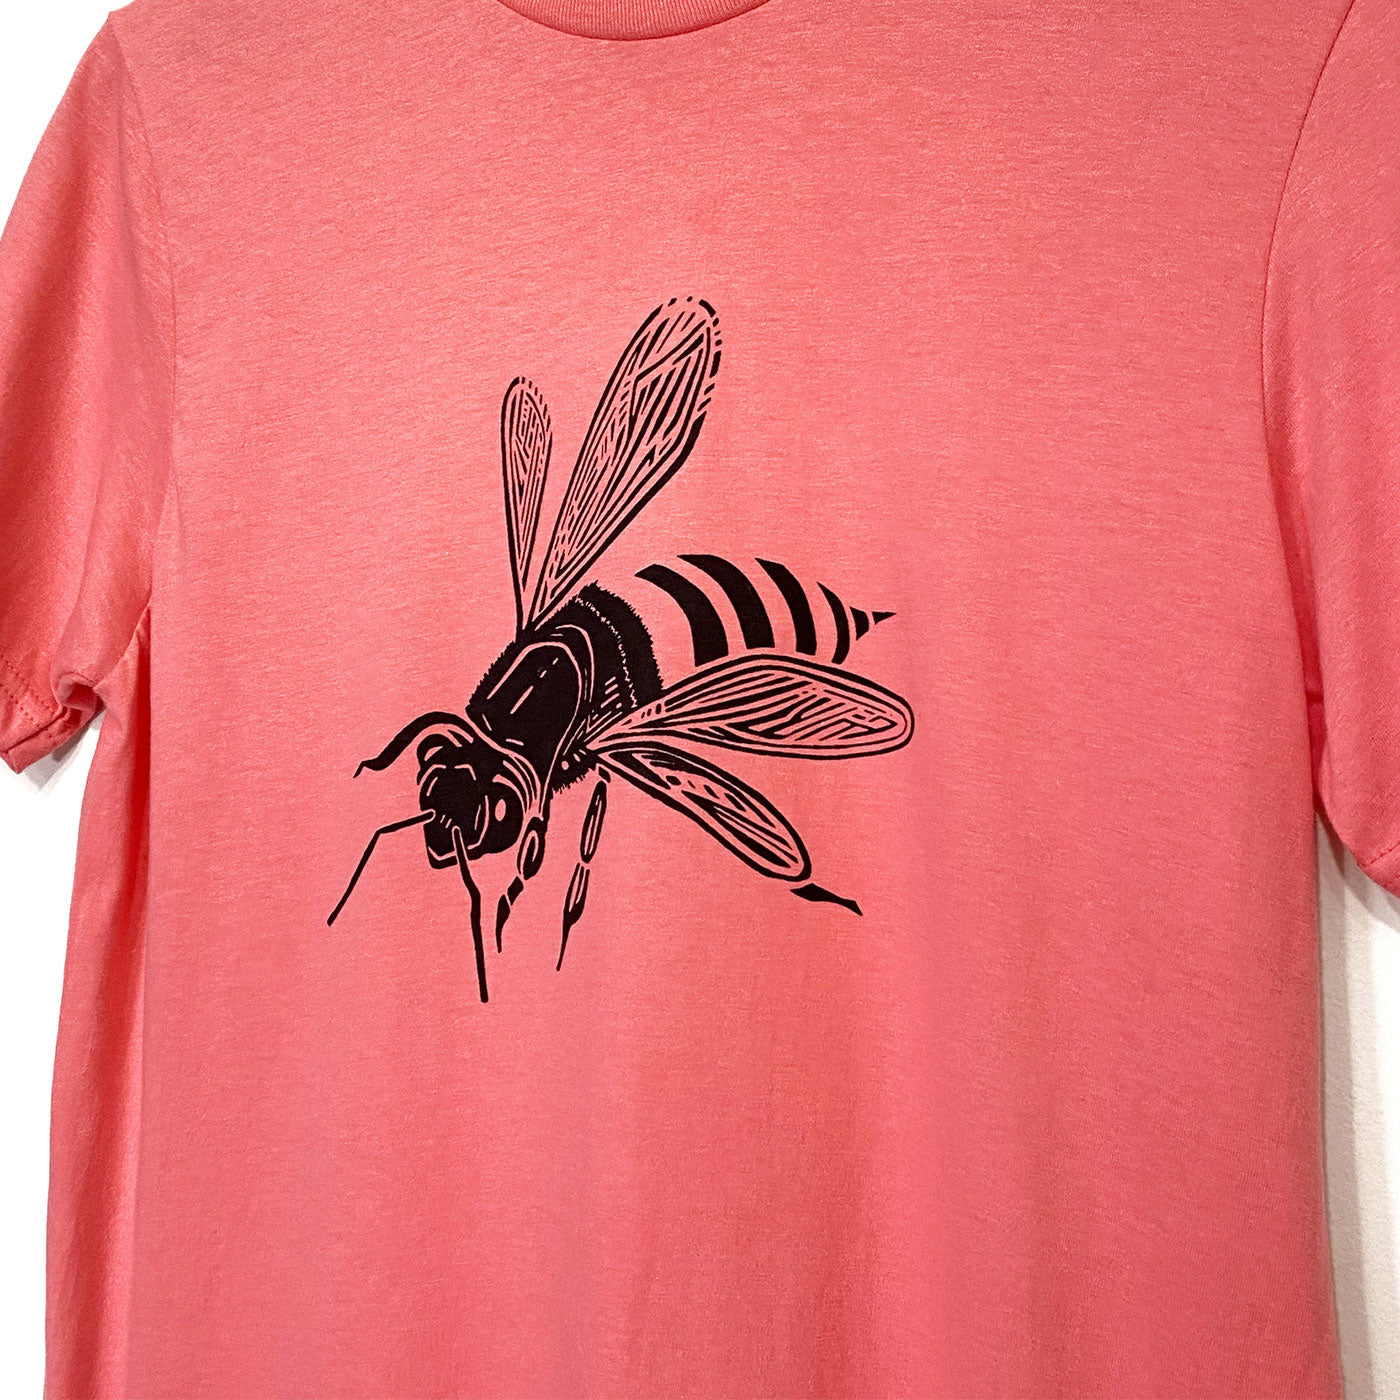 Focus on a black bee on the front of a coral pink tee